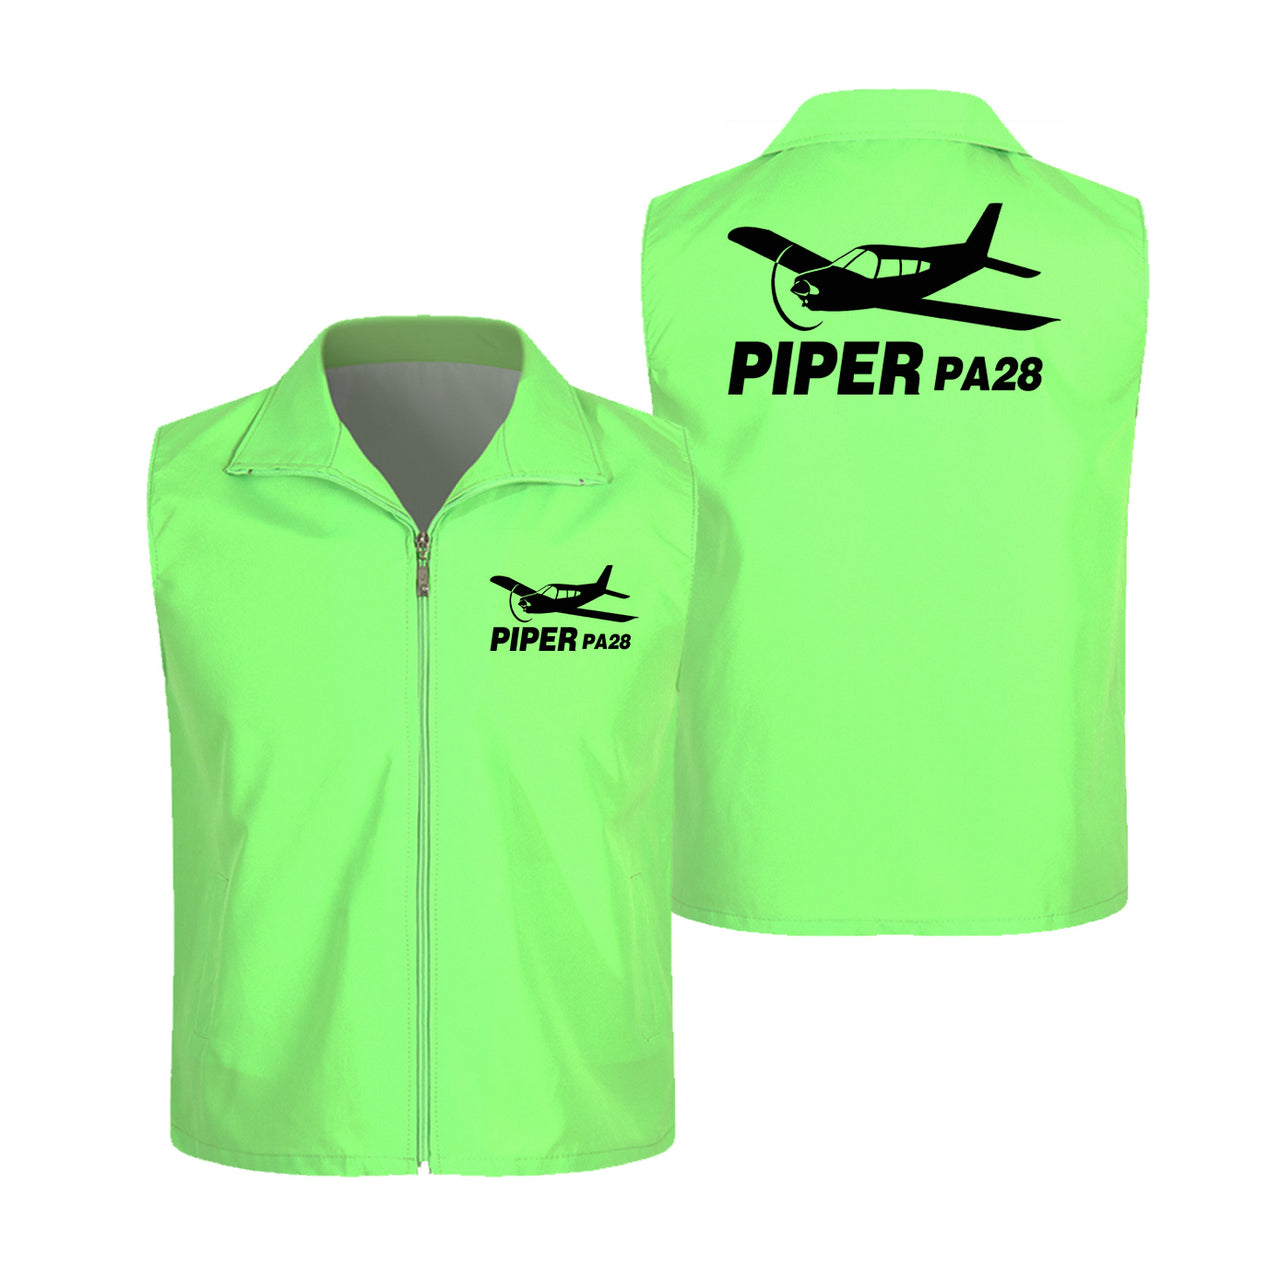 The Piper PA28 Designed Thin Style Vests